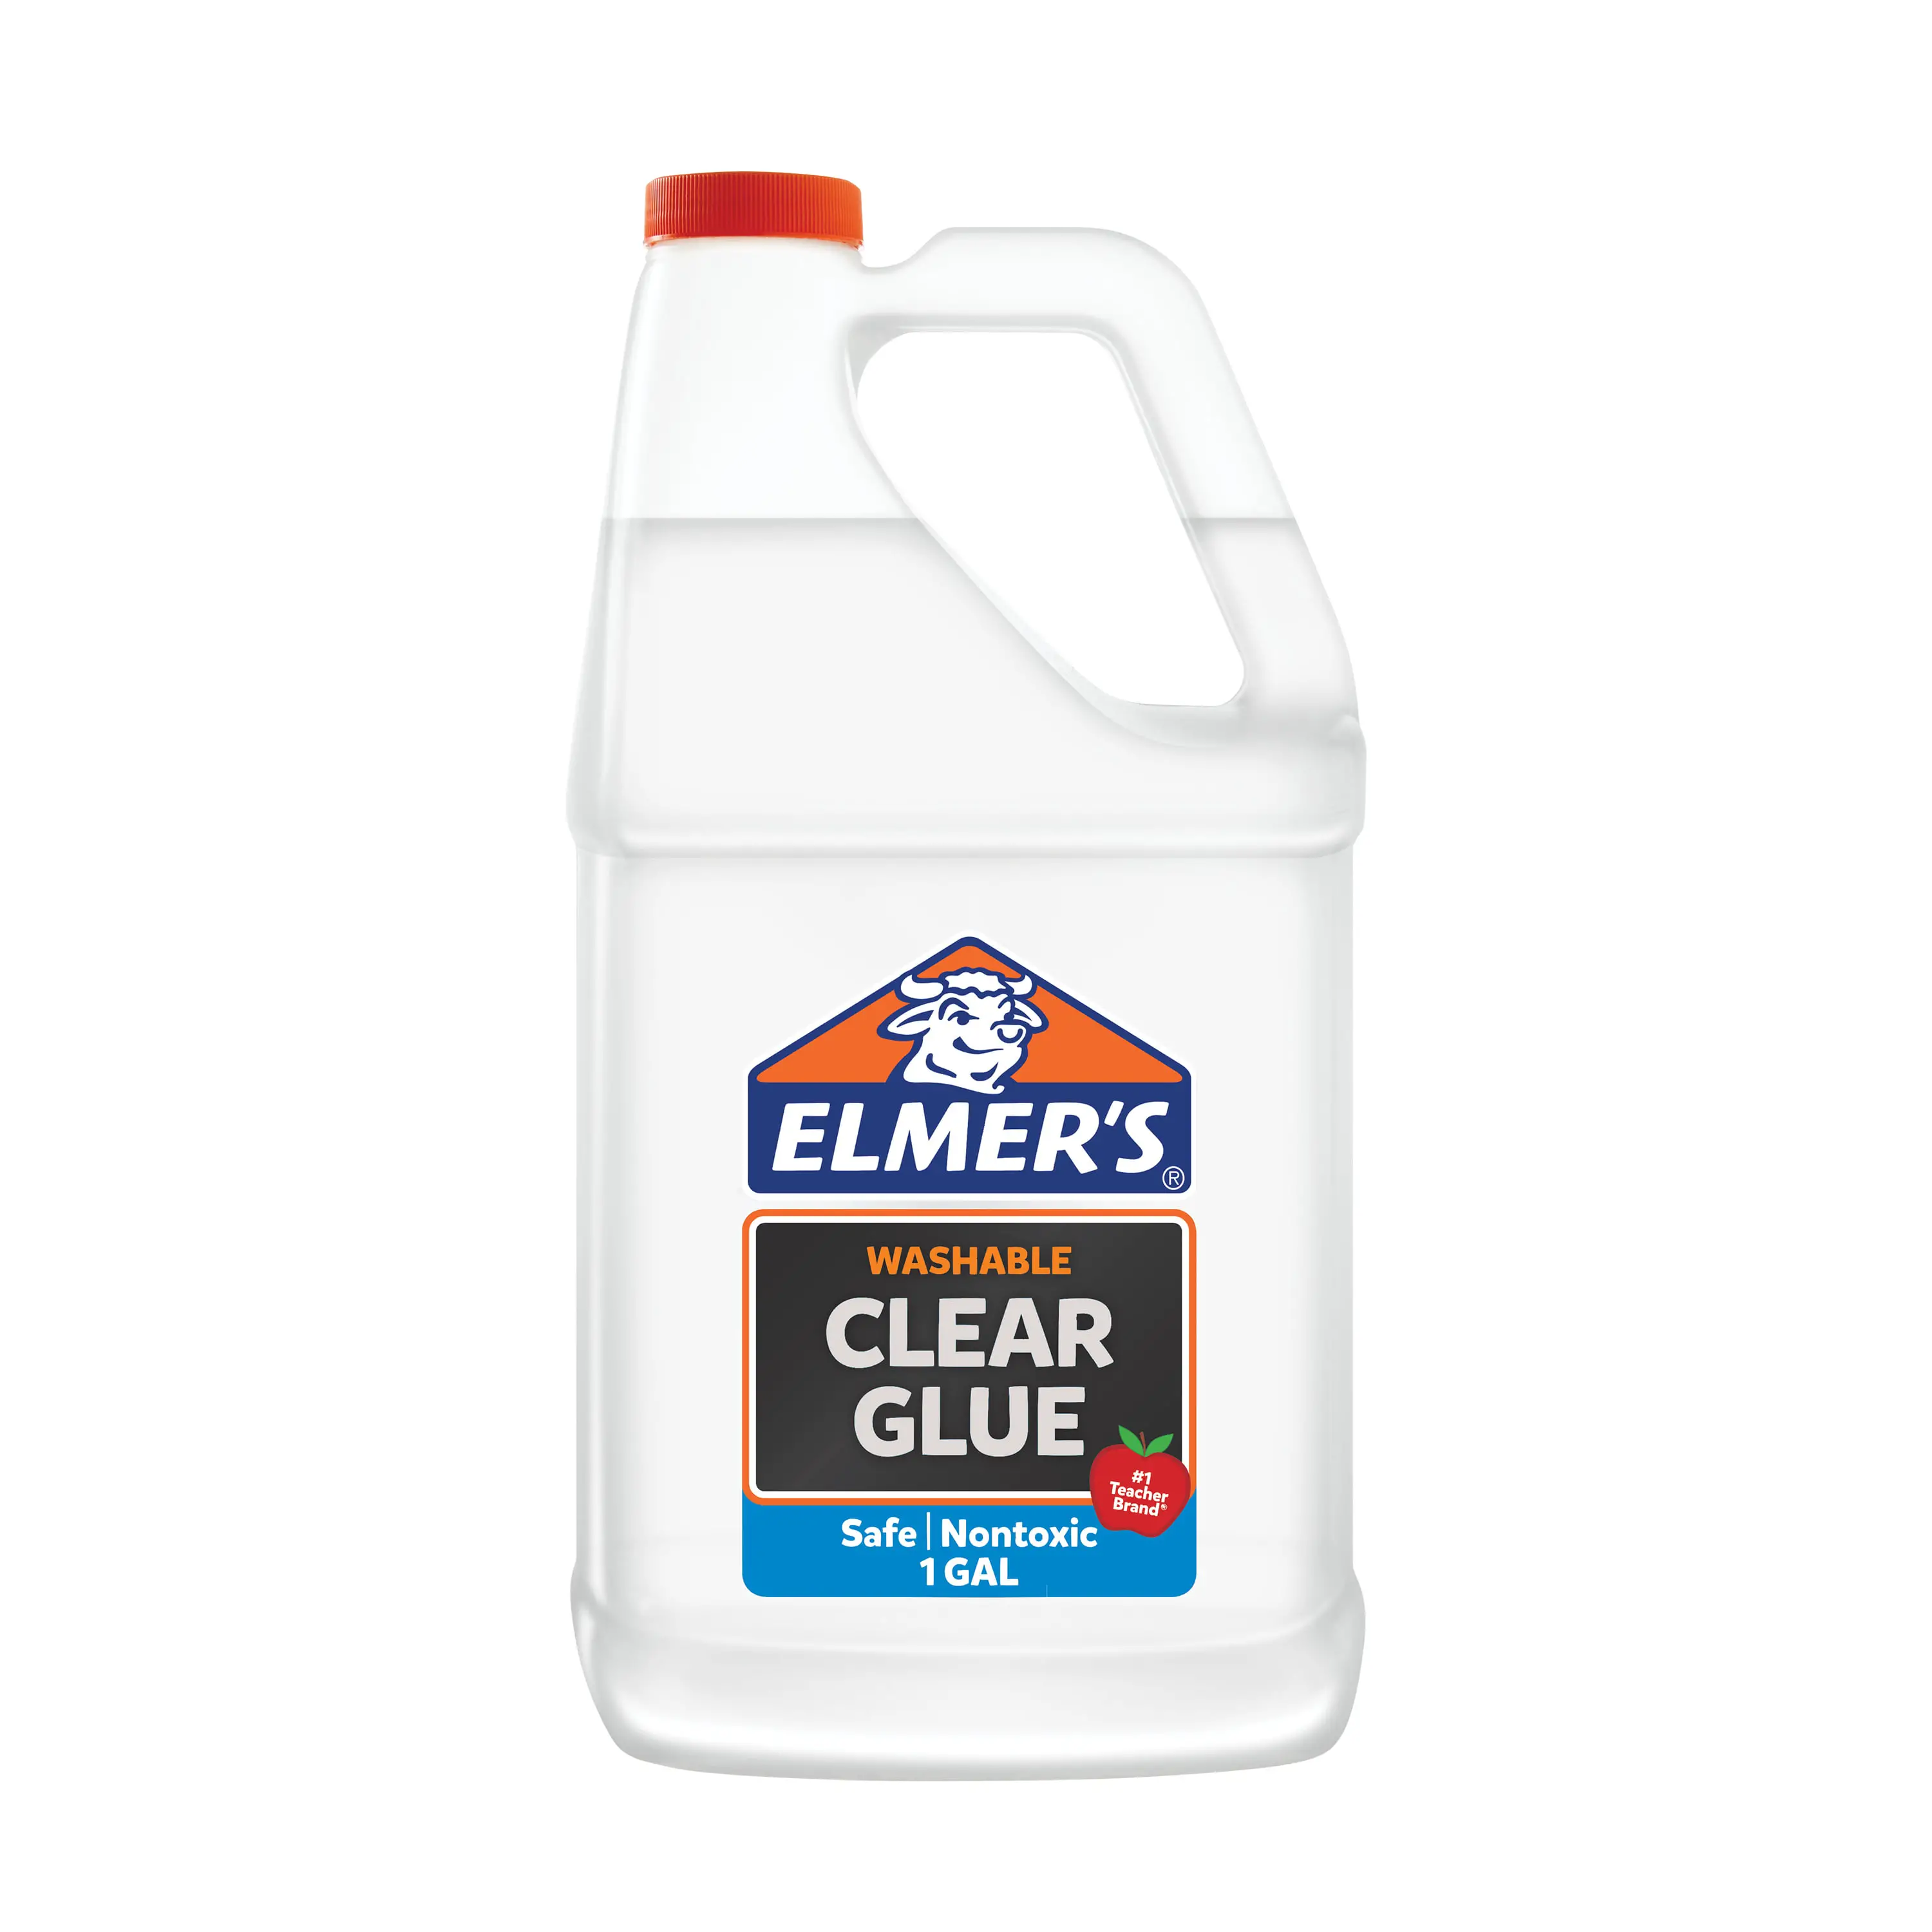 How Much Do Glue Cost